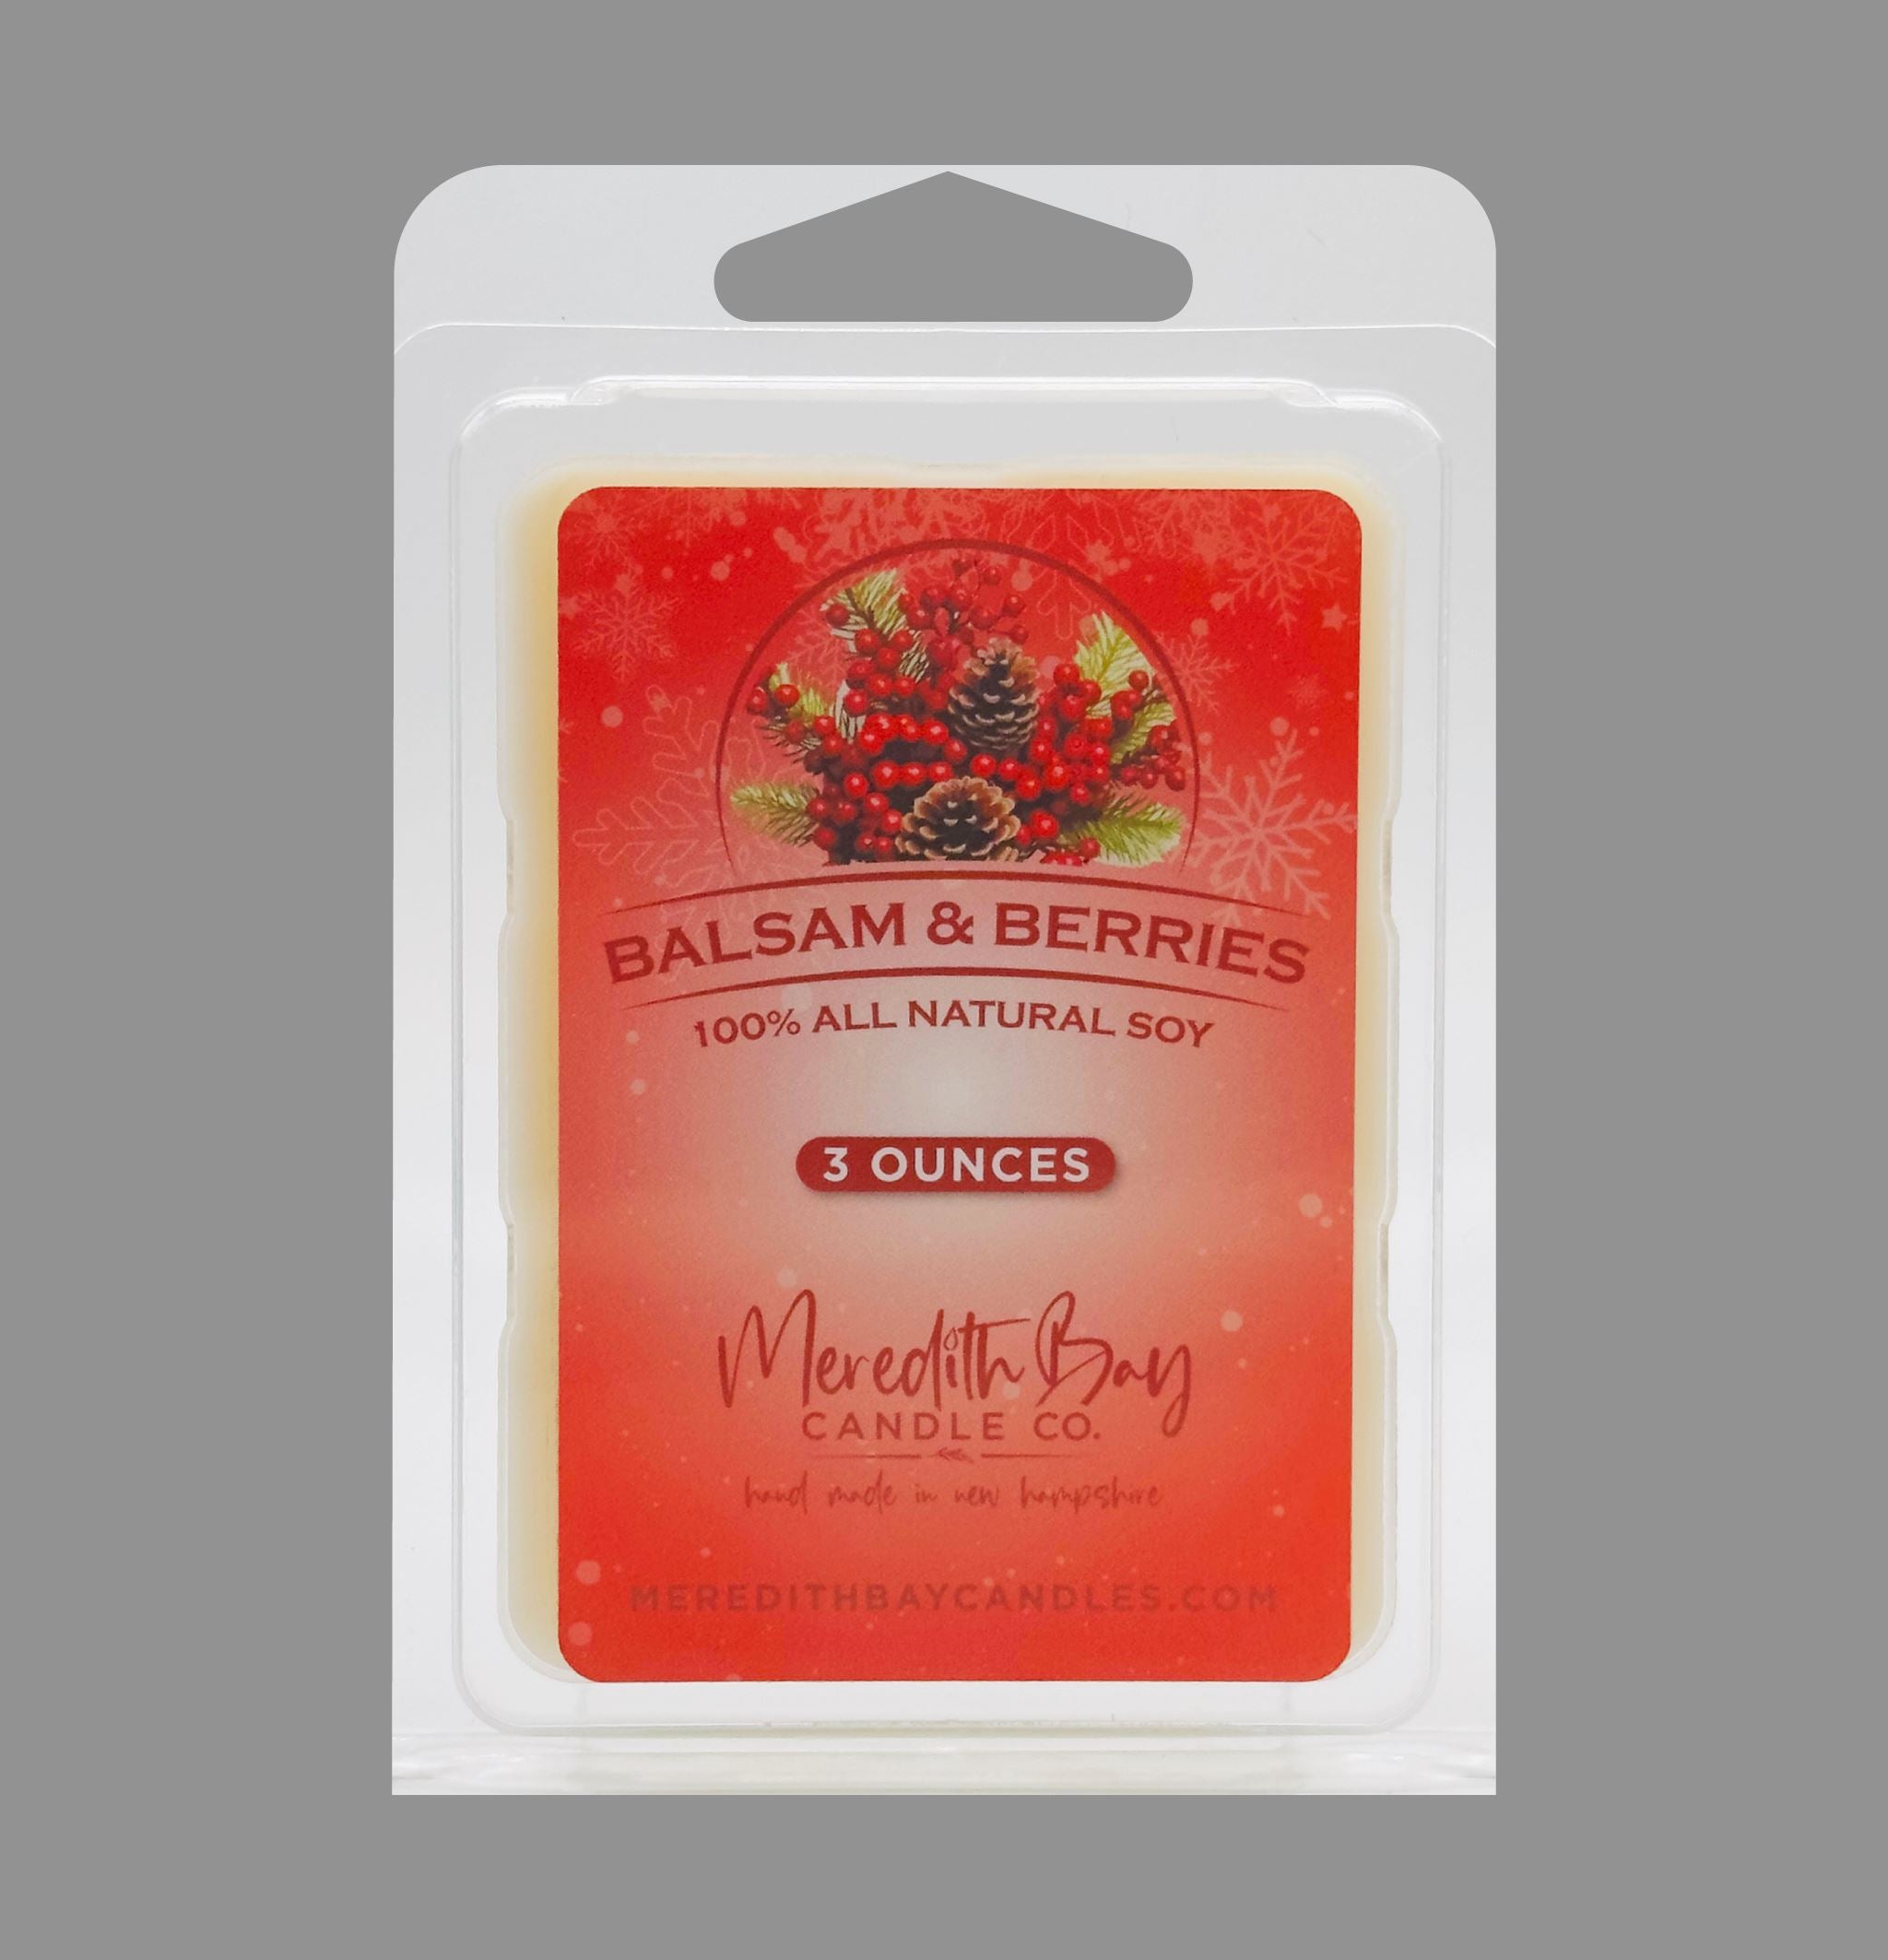 Balsam & Berries Wax Melt Meredith Bay Candle Co 